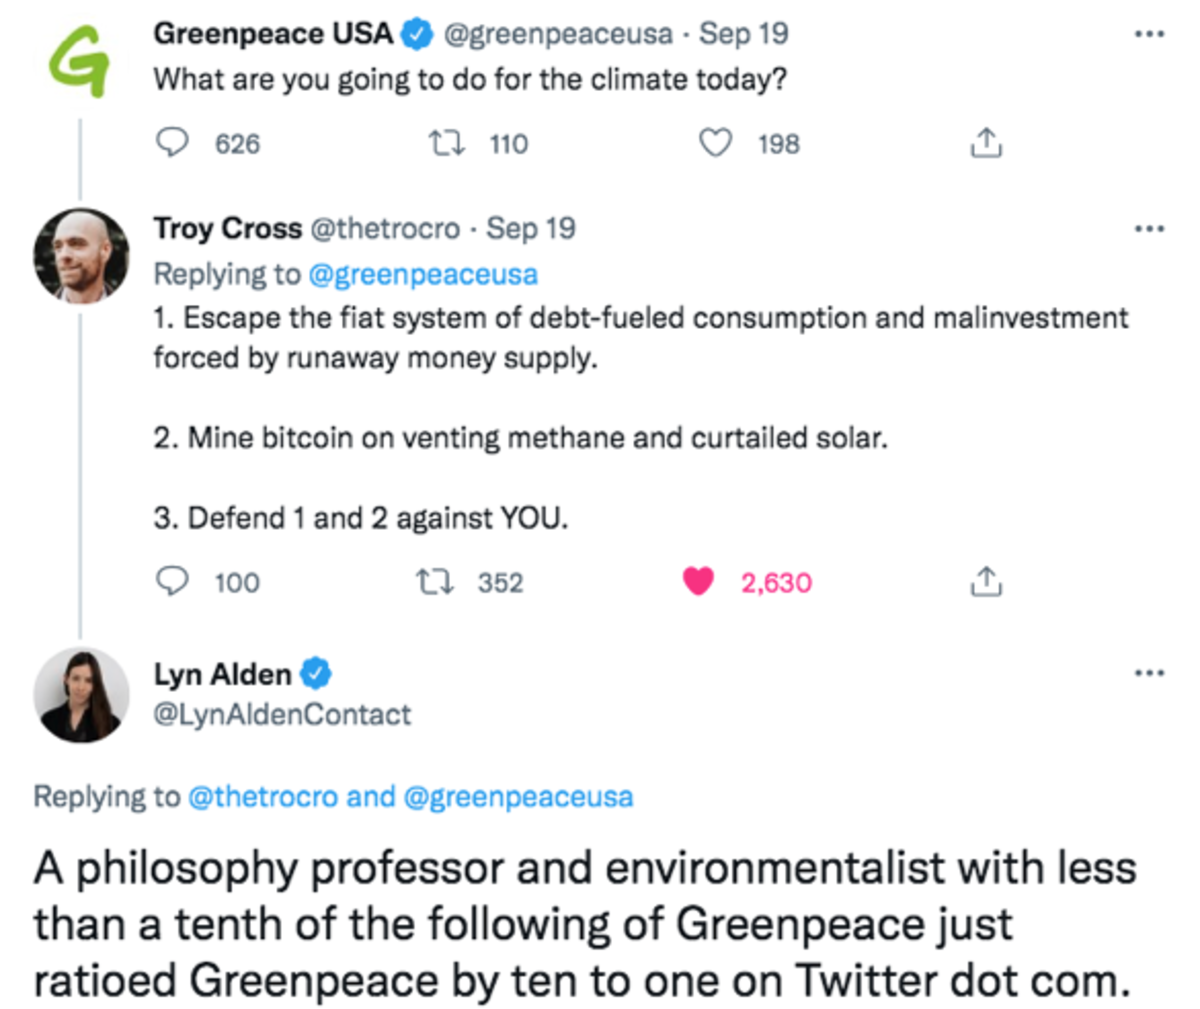 Underlying disinformation exposed during Greenpeace USA’s “Change The Code” campaign only served to rally the Bitcoin community.